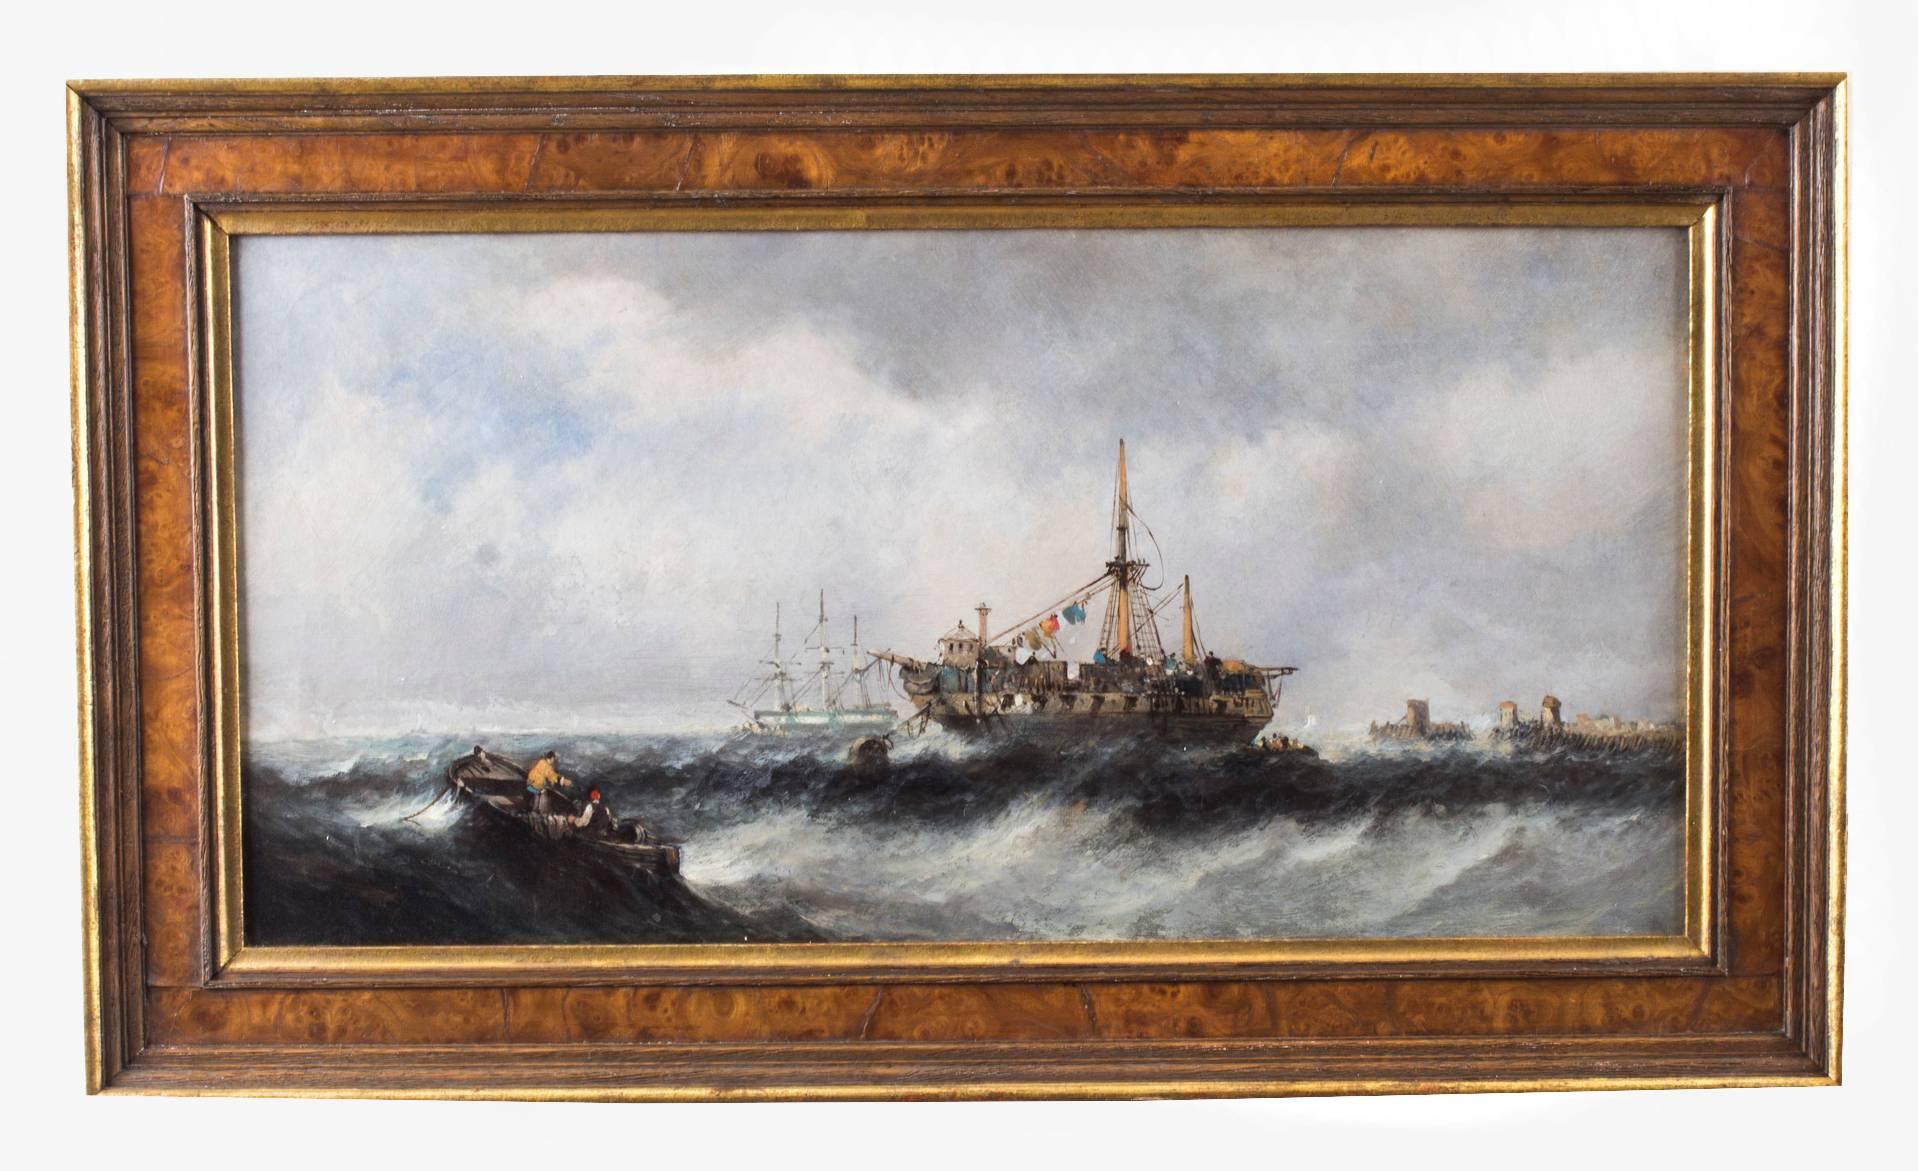 A wonderful pair of seascape paintings of fishing boats attributed to William Mcalpine (British 19th century) titled 'Beached Fishing Vessels' and 'Shipping in Rough Seas', circa 1860 in date.
 
This is a pair of sensitively painted waterscapes of